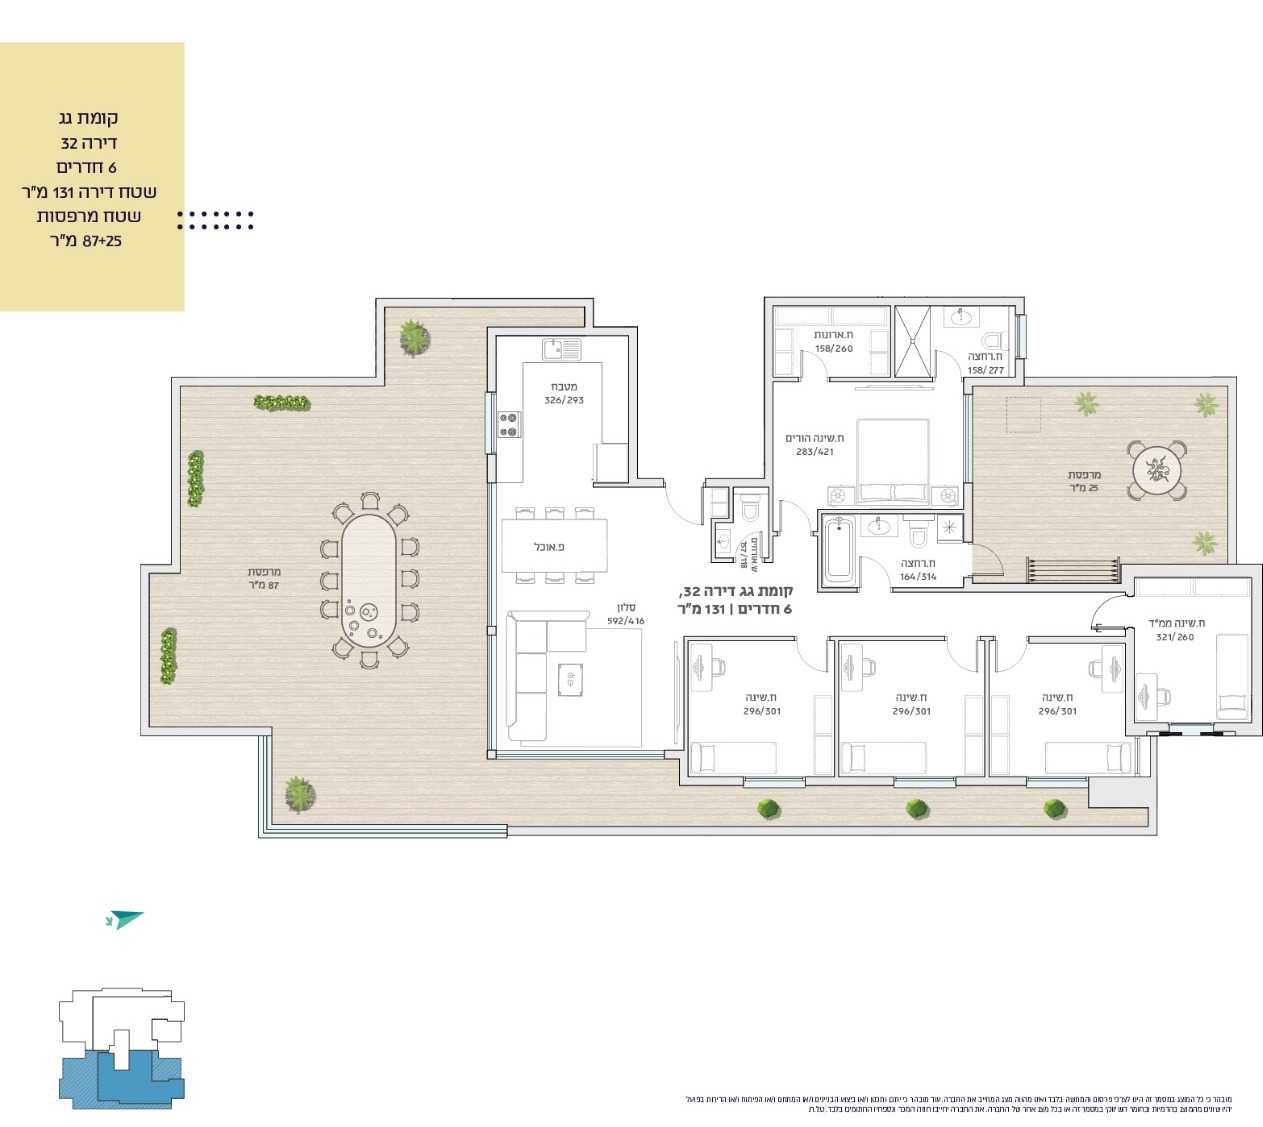 6-room penthouse of 131 m2 with a terrace of 122 m2